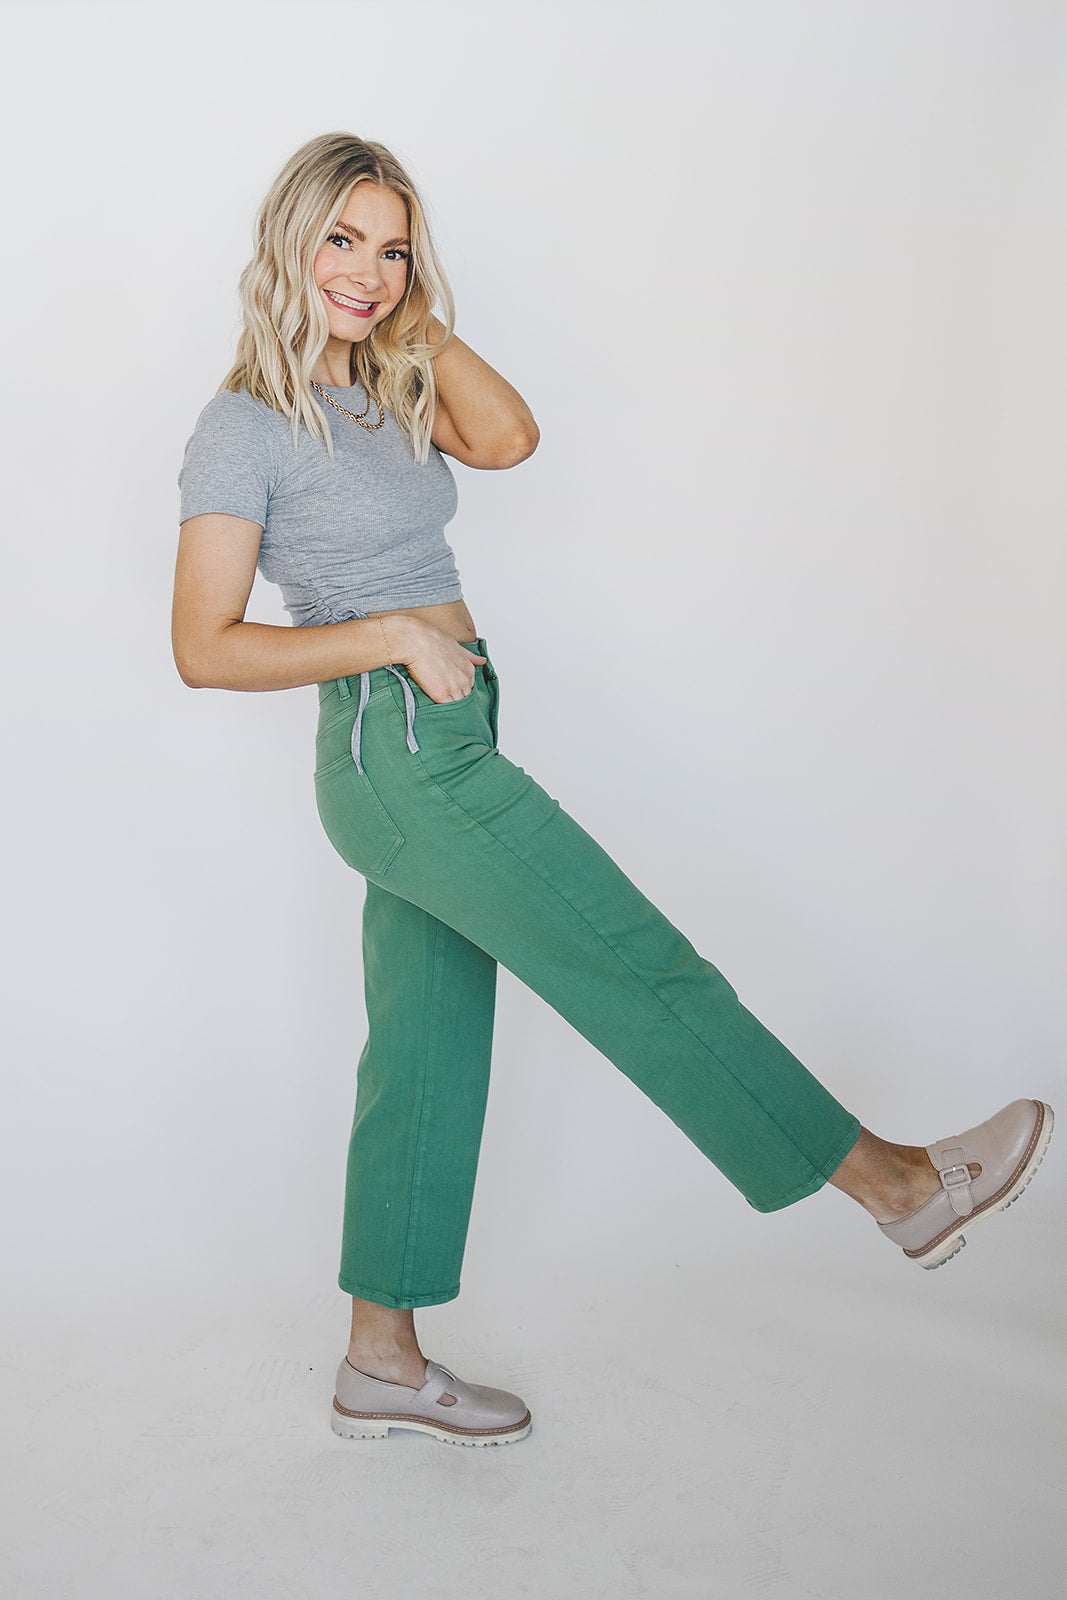 [PREORDER] Garment-Dyed Non-Distressed Cropped Wide Leg Jeans - Green